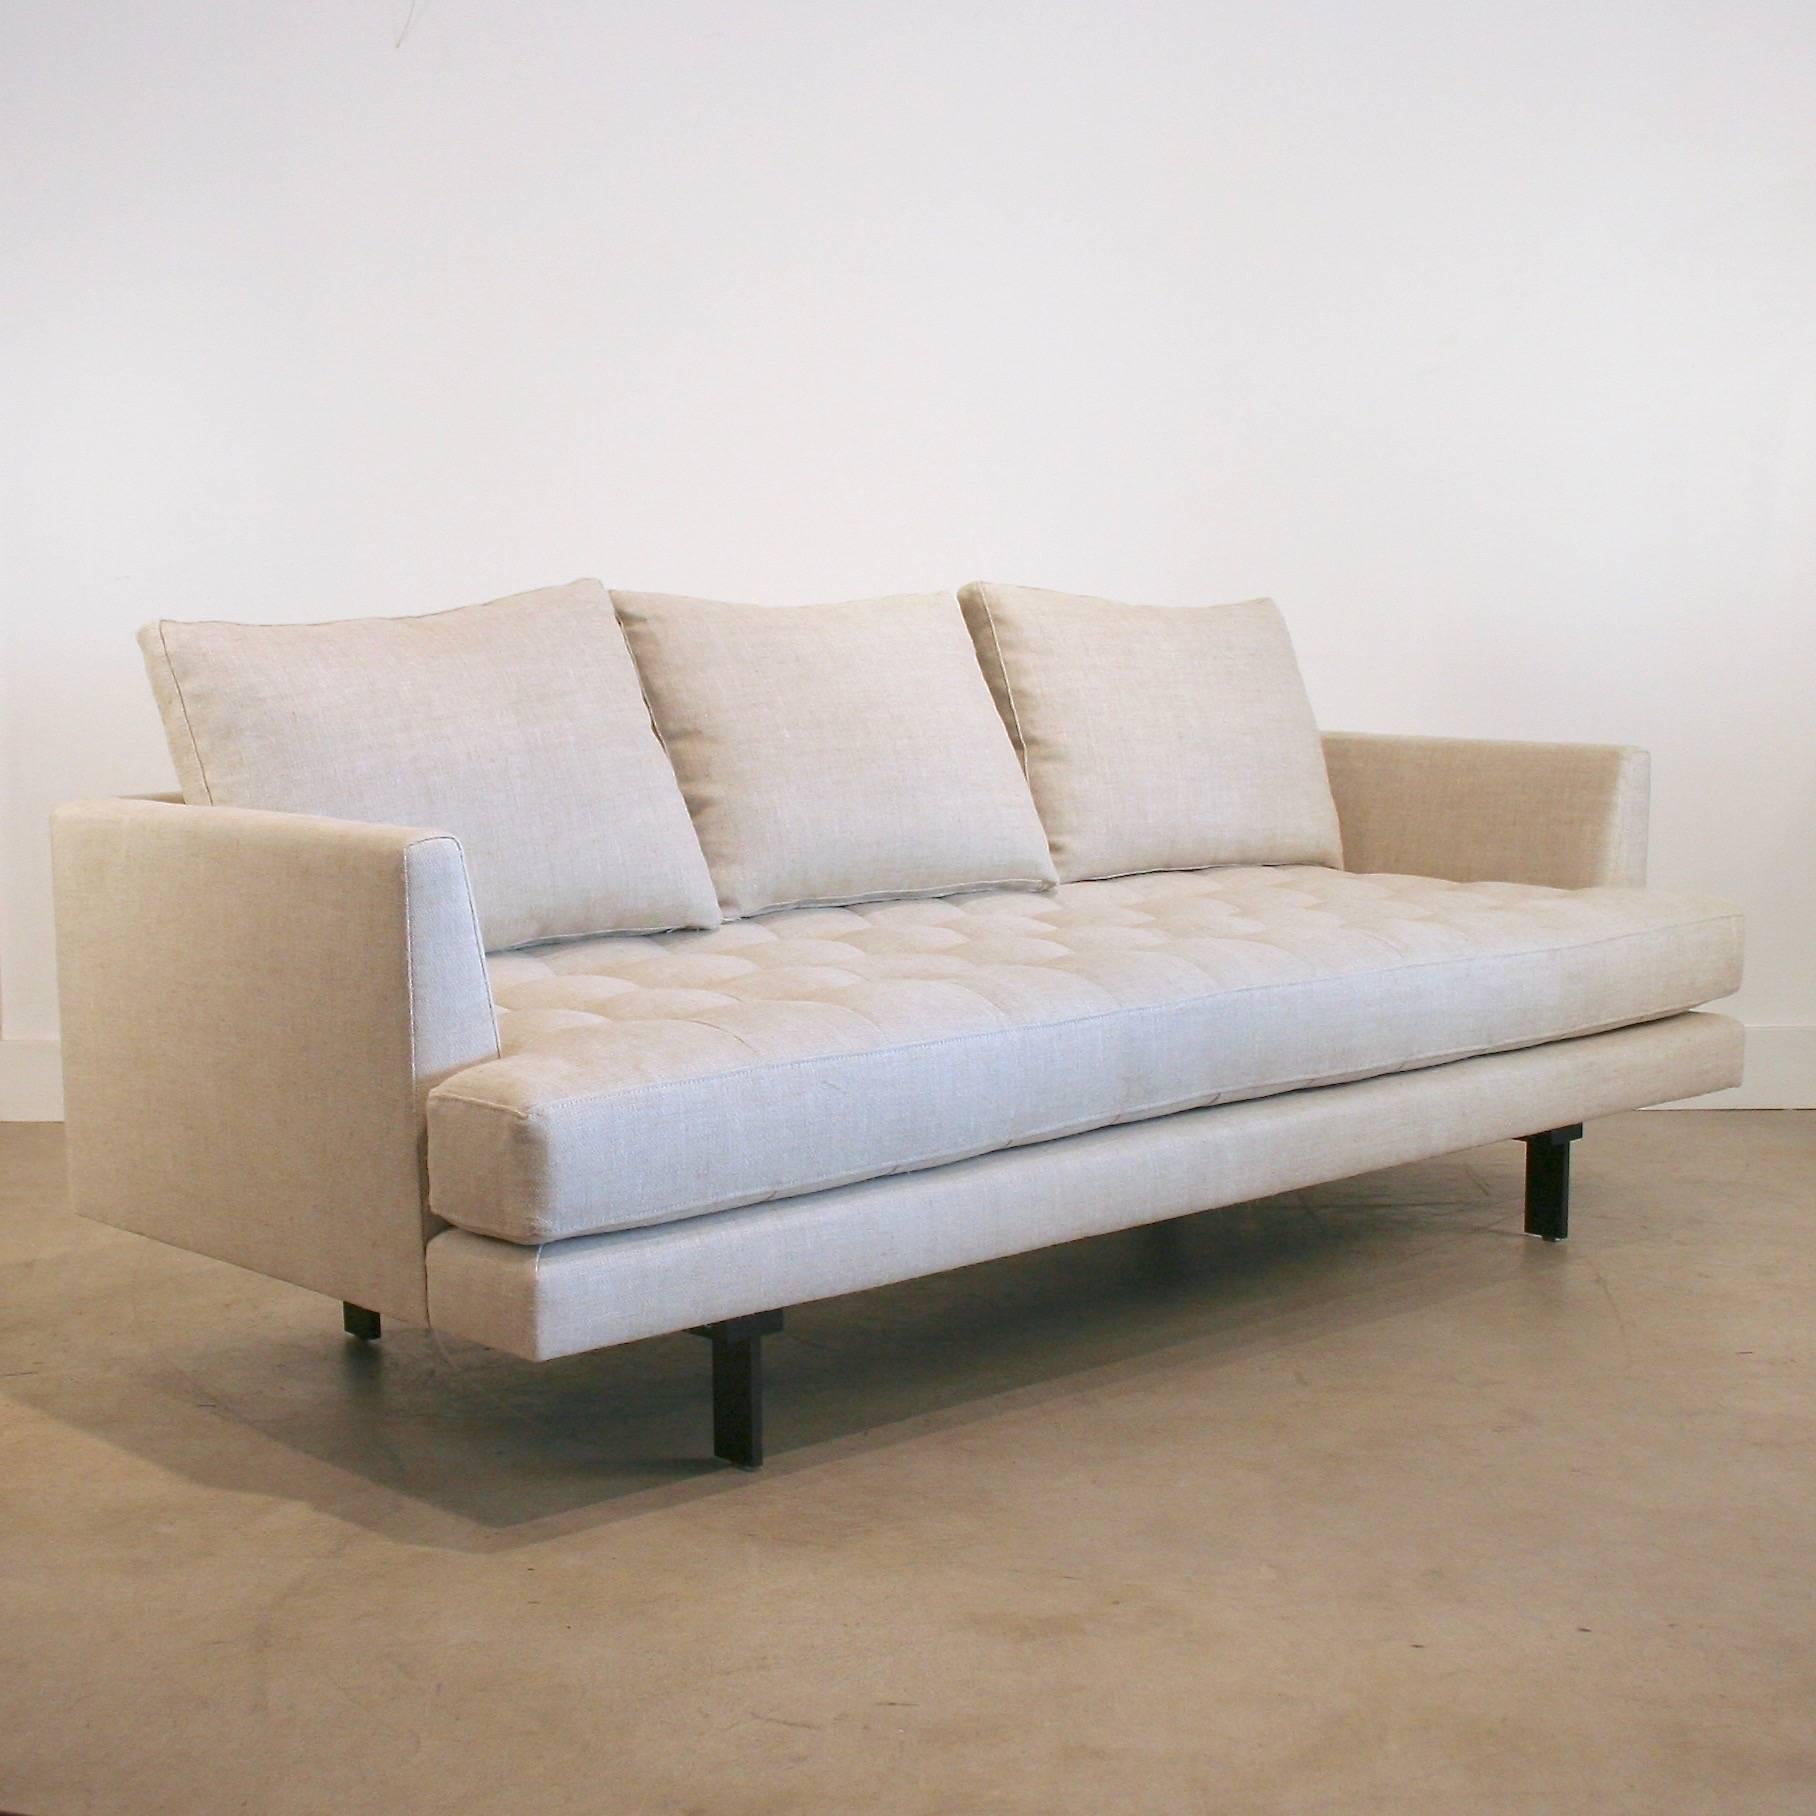 Modern design with square-tufted bench seat cushion, and loose back cushions. Unique black steel legs and a sleek low-profile frame. This model is upholstered in a beautiful natural 100% Belgian linen.
Eco-friendly foam seat and down-wrapped